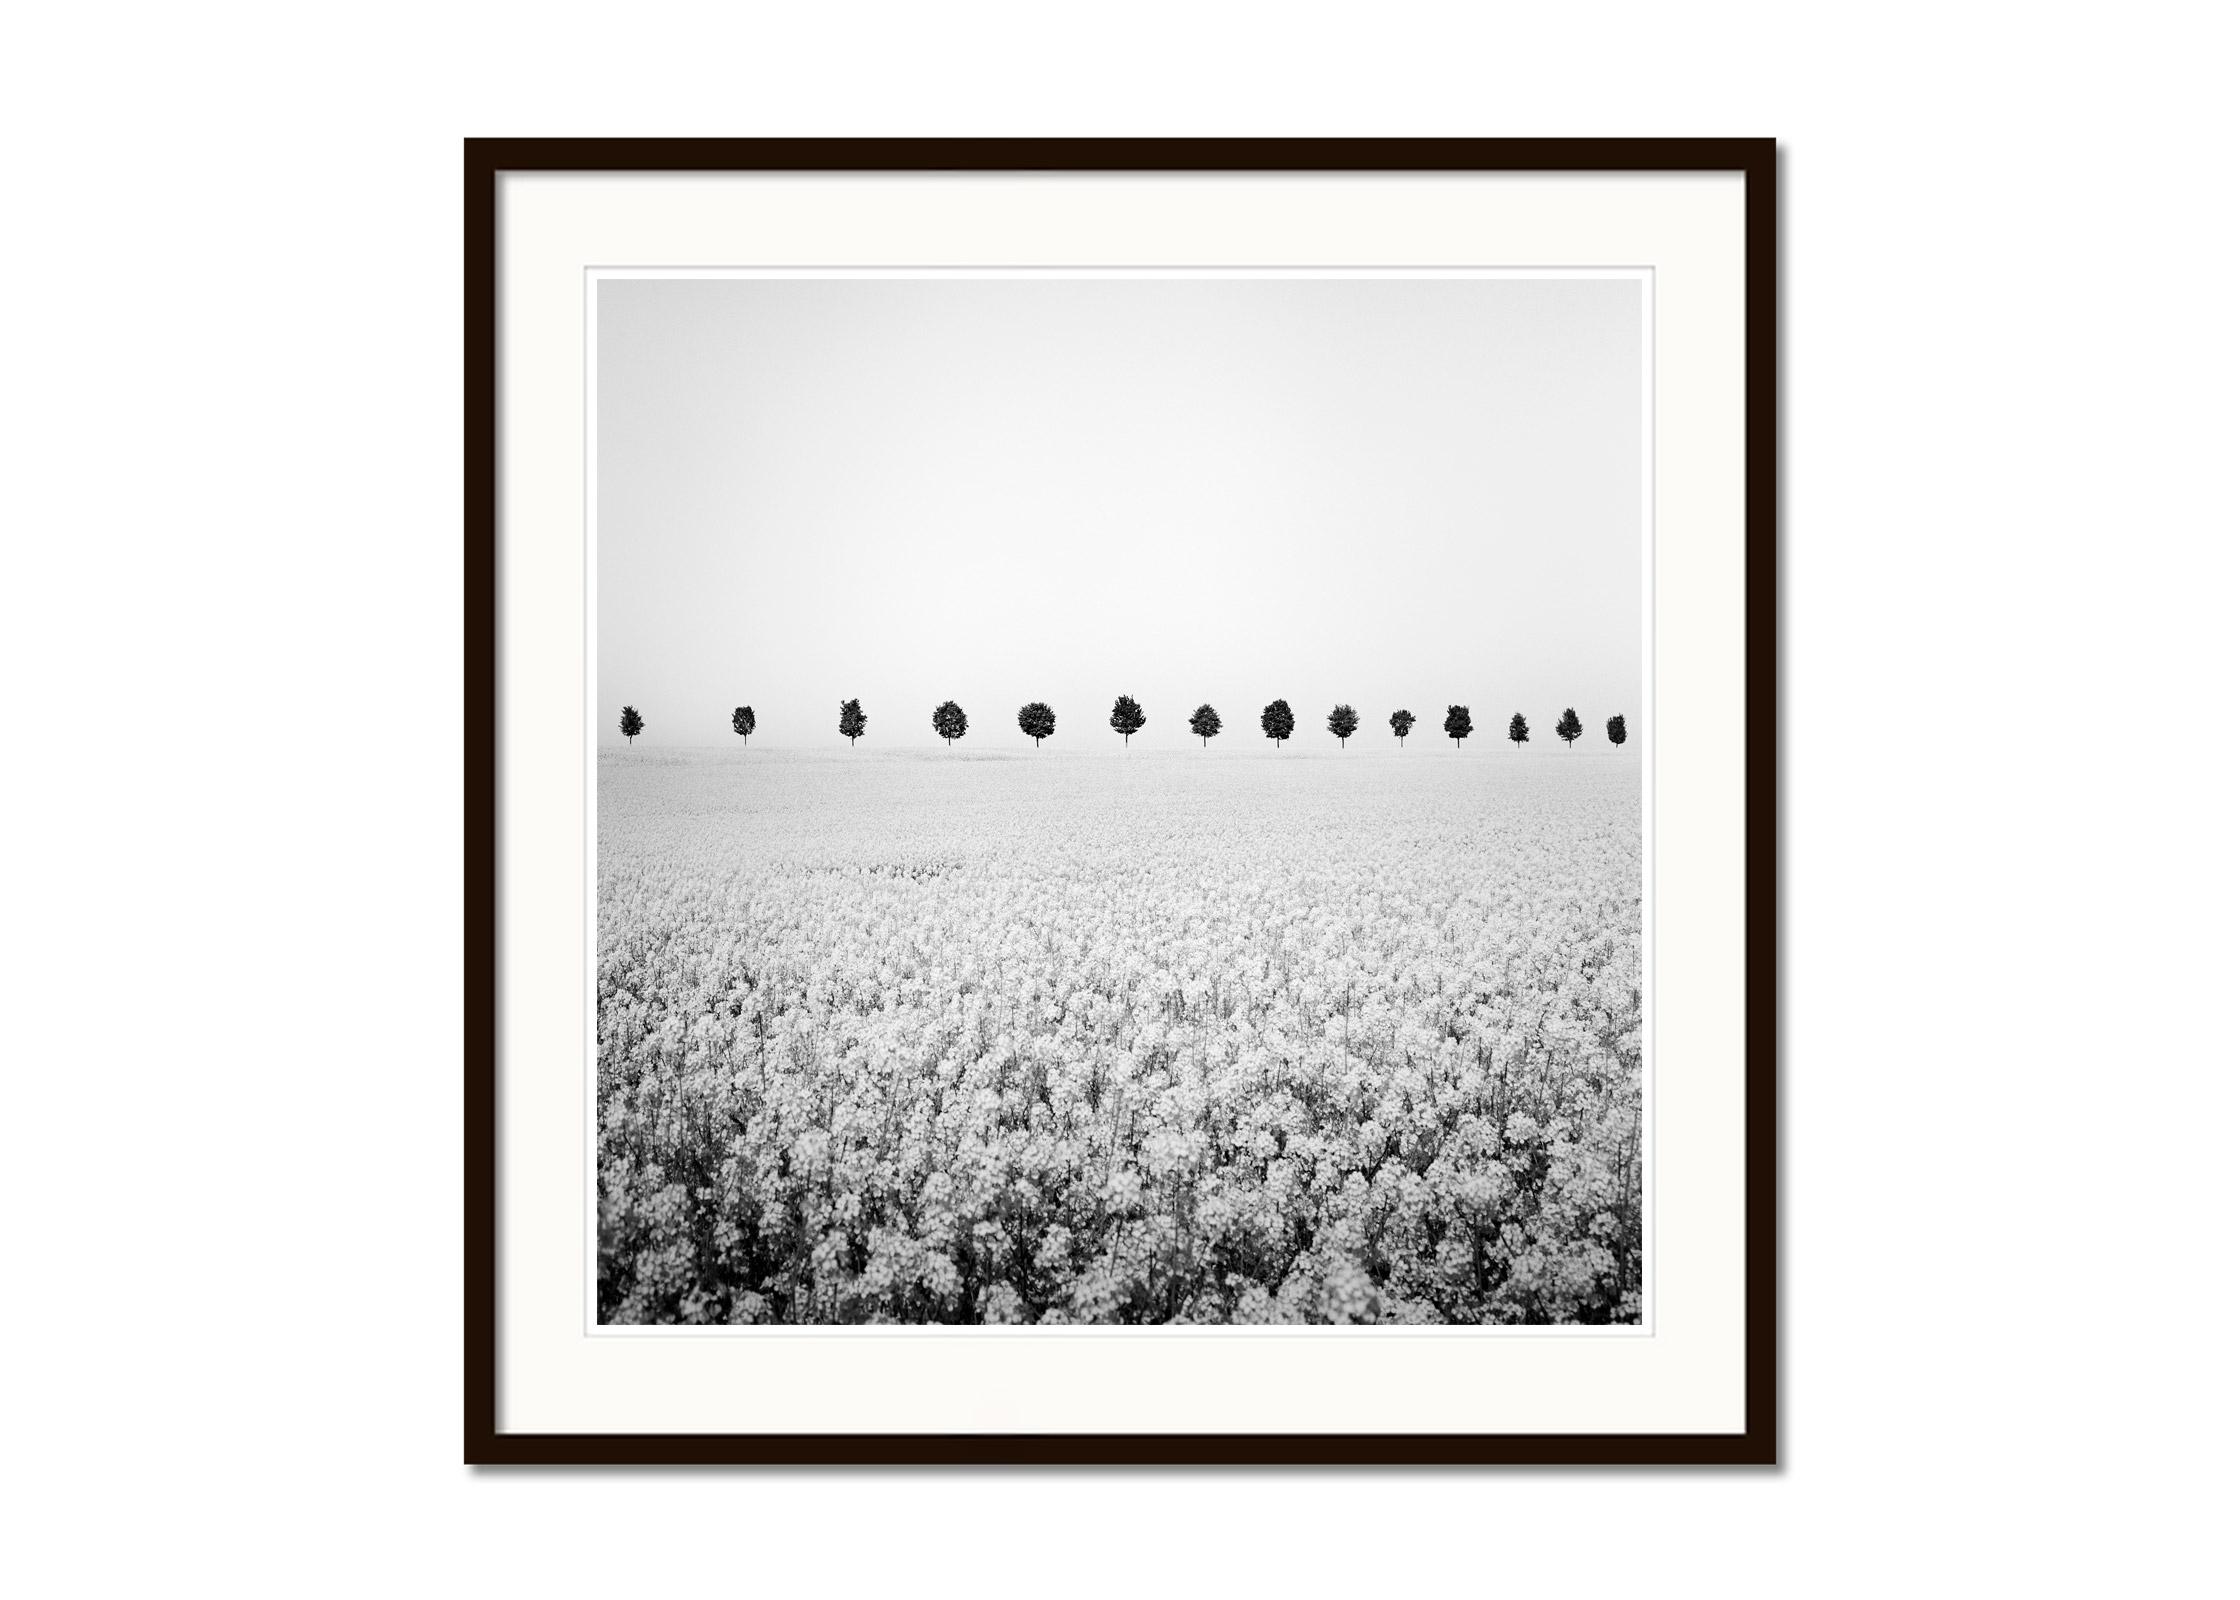 Brassica Napus, Tree Avenue, Rapeseed Field, black and white art photography - Gray Landscape Photograph by Gerald Berghammer